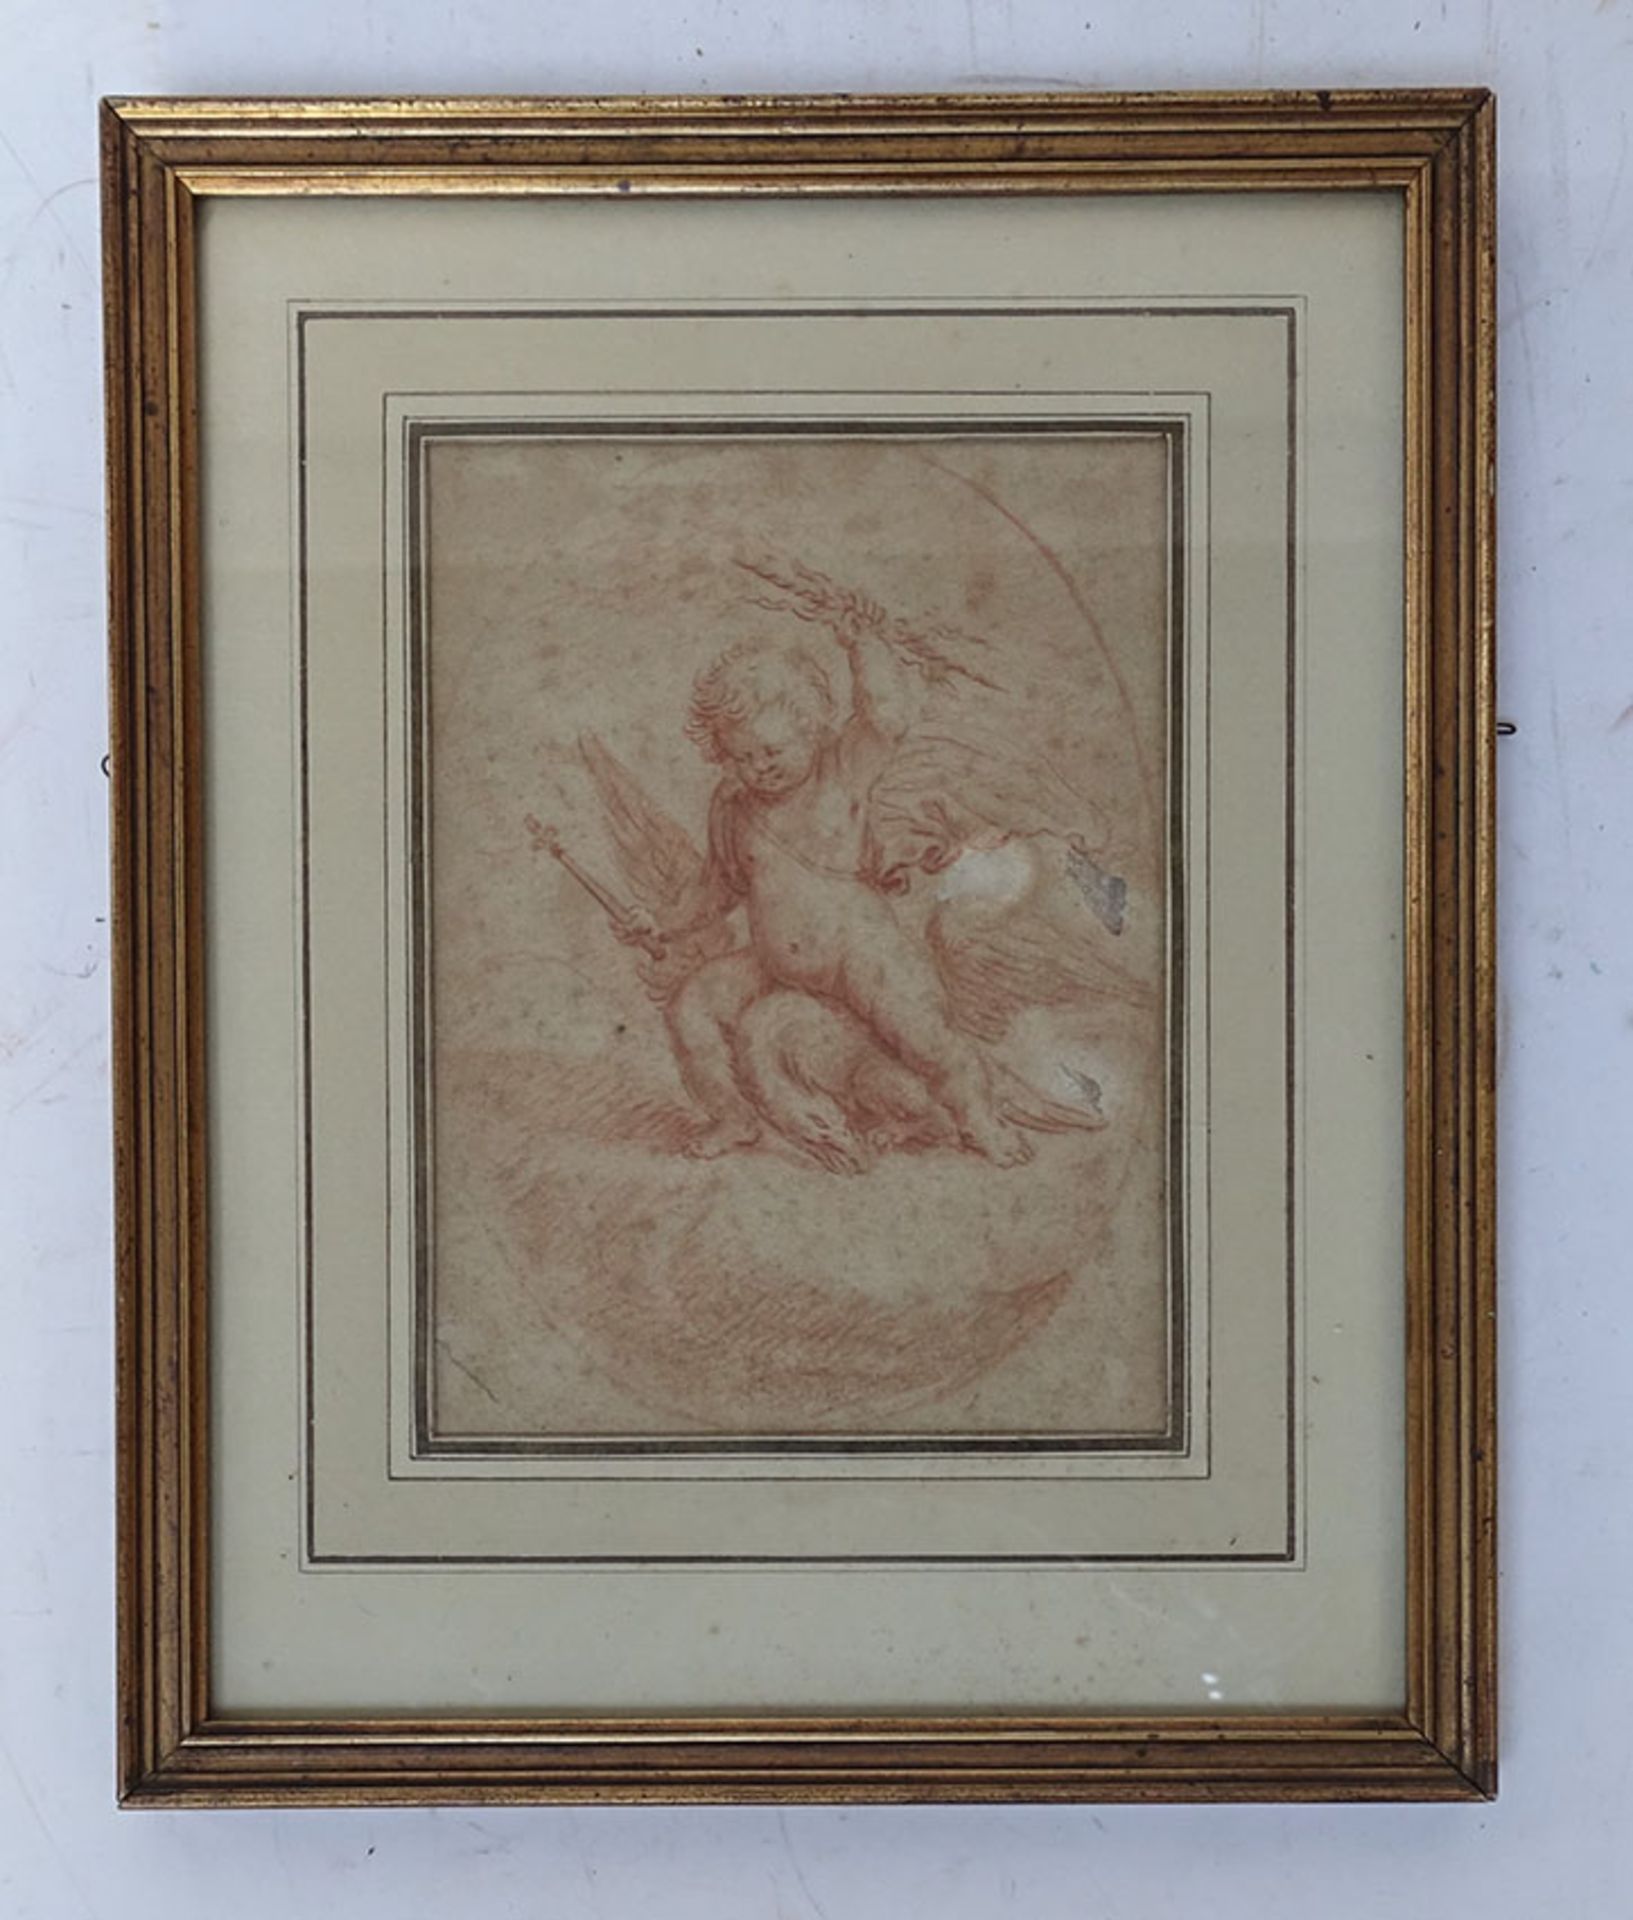 FLEMISH SCHOOL, 18th c. -- (Young Jupiter with the Eagle). Oval drawing in red chalk. 164 x 122